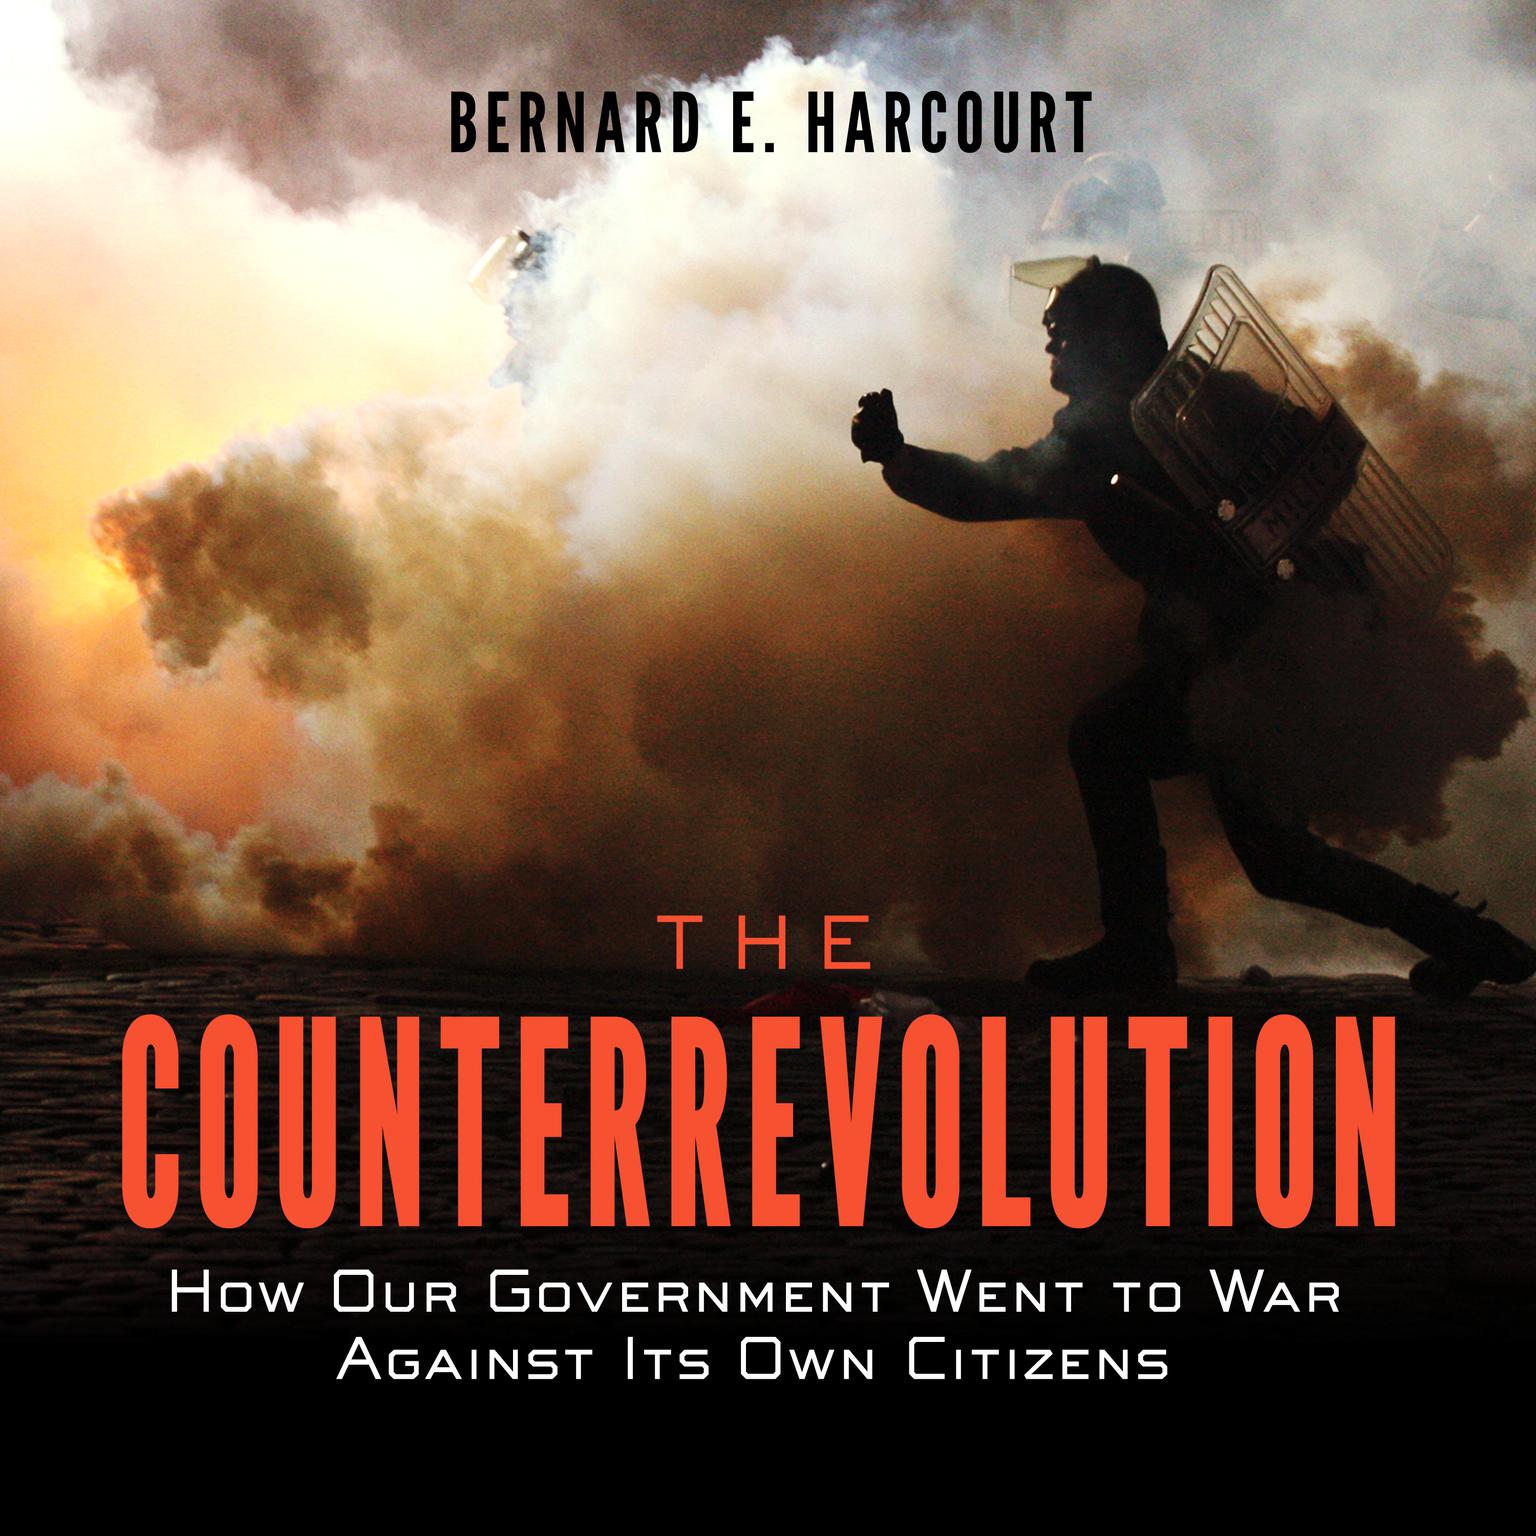 The Counterrevolution: How Our Government Went to War Against Its Own Citizens Audiobook, by Bernard E. Harcourt